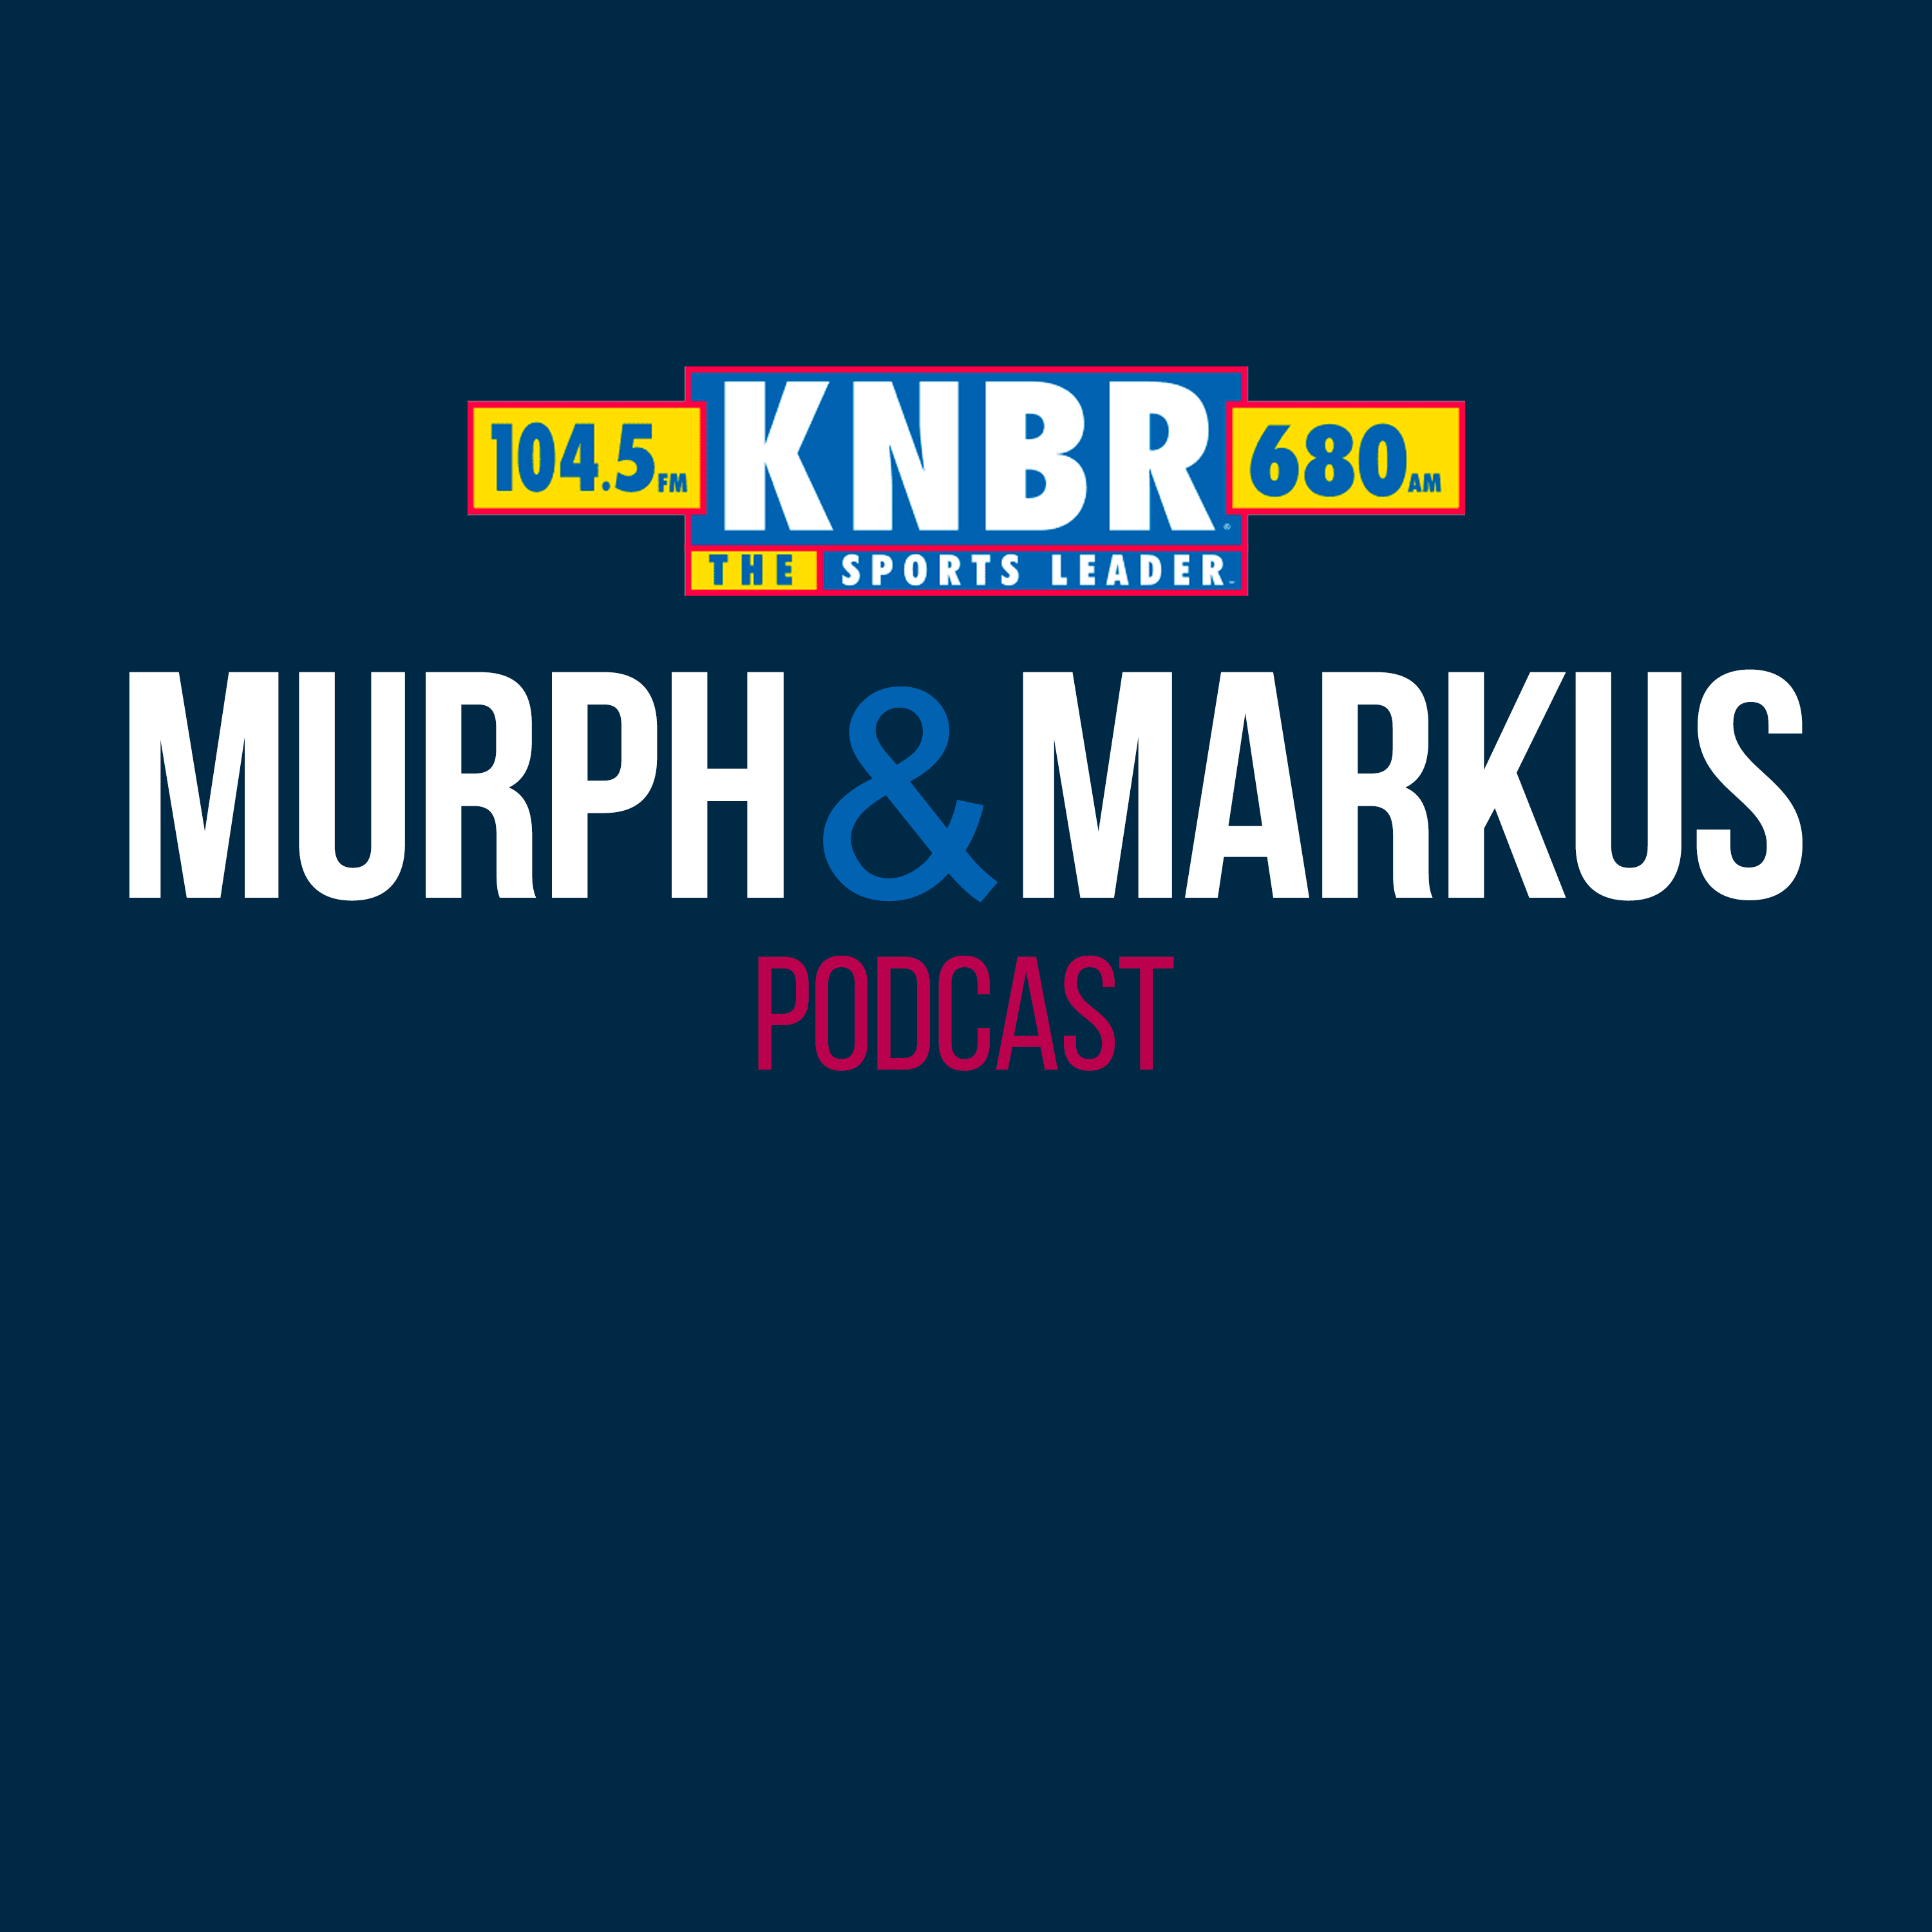 6-13 Hour 2: Murph & Markus react to Tom Brady being inducted into the Patriots Hall of Fame last night, discuss how the Giants can get back to .500 on Flag Day, and talk to Jon Miller